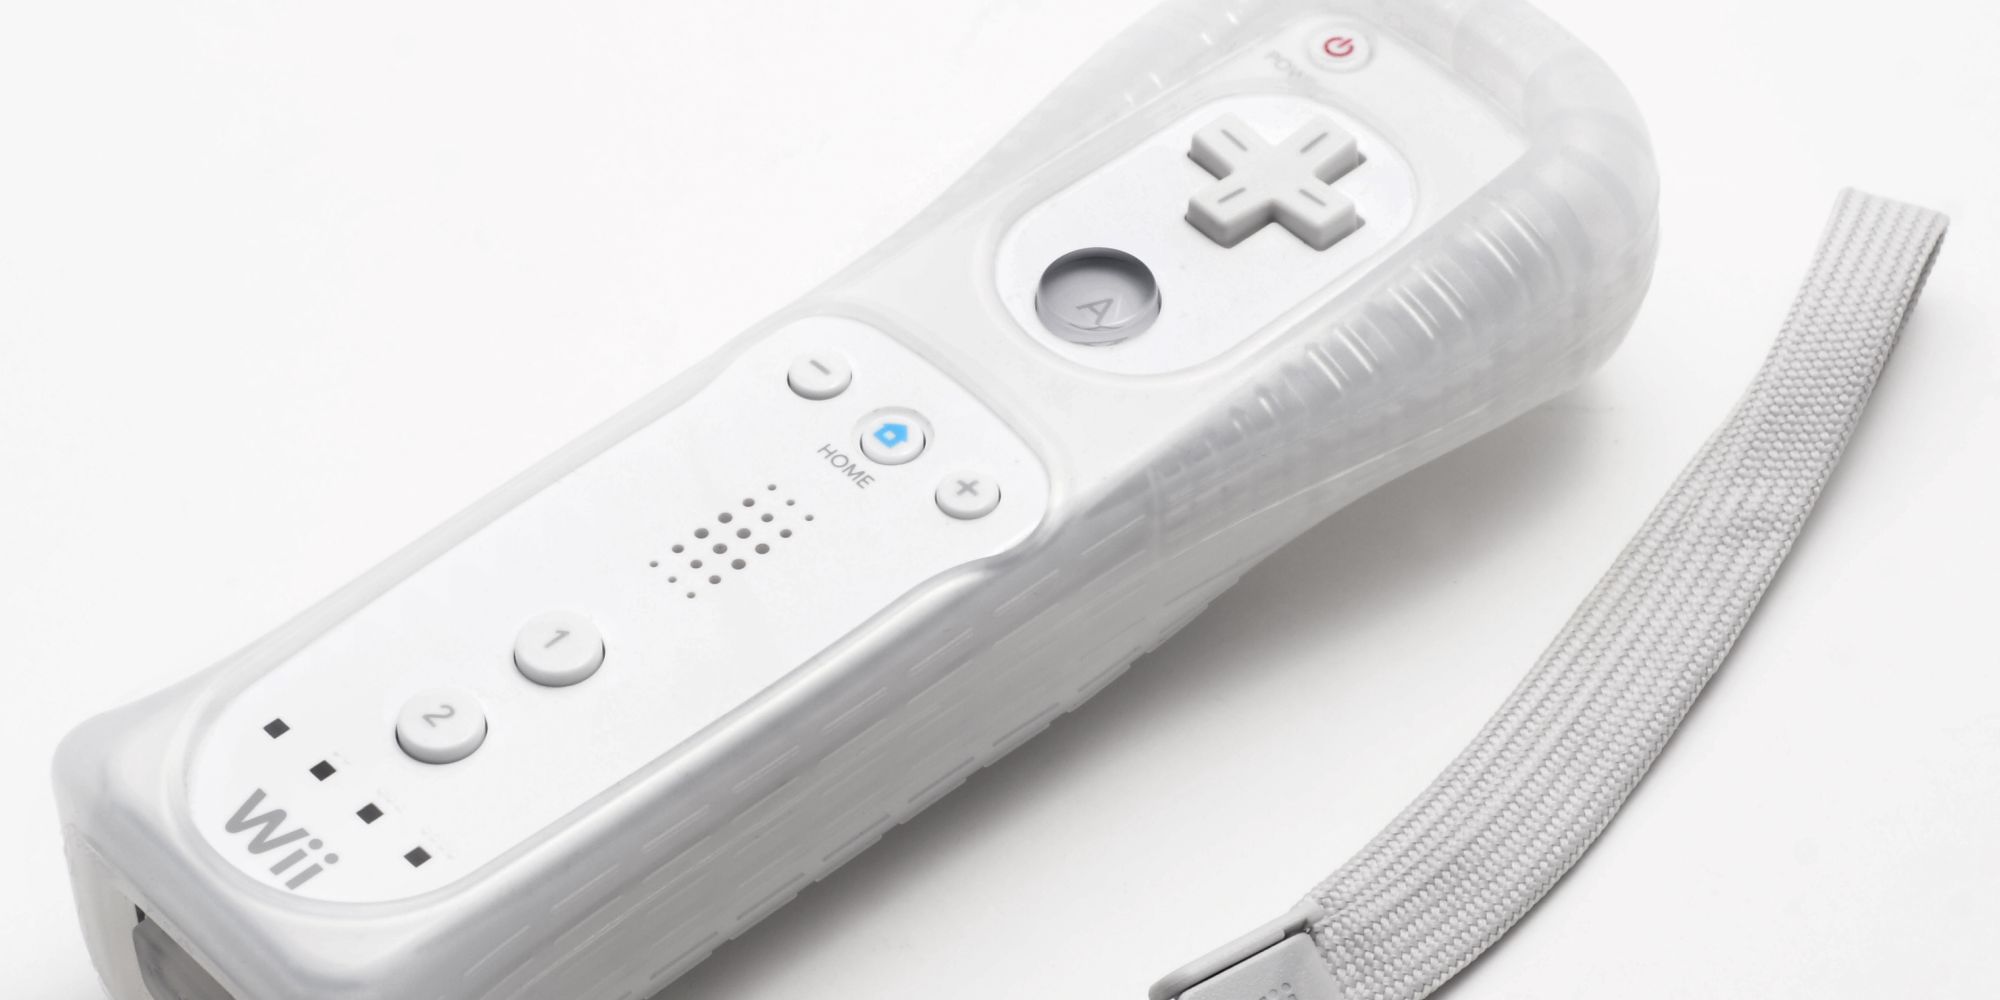 A Nintendo Wii remote in its protective soft holding case